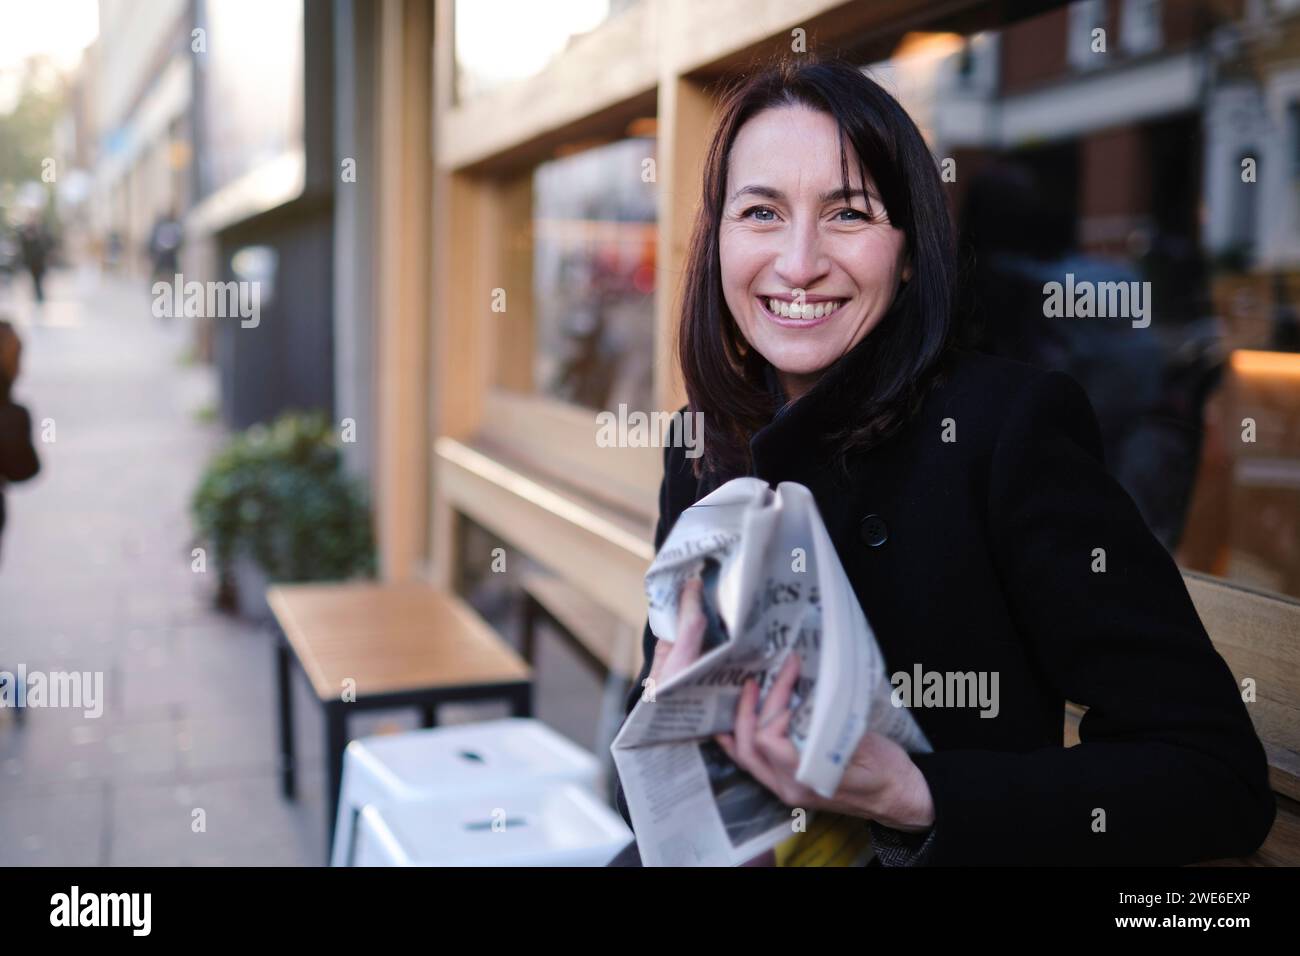 Smiling mature woman sitting with newspaper near building Stock Photo